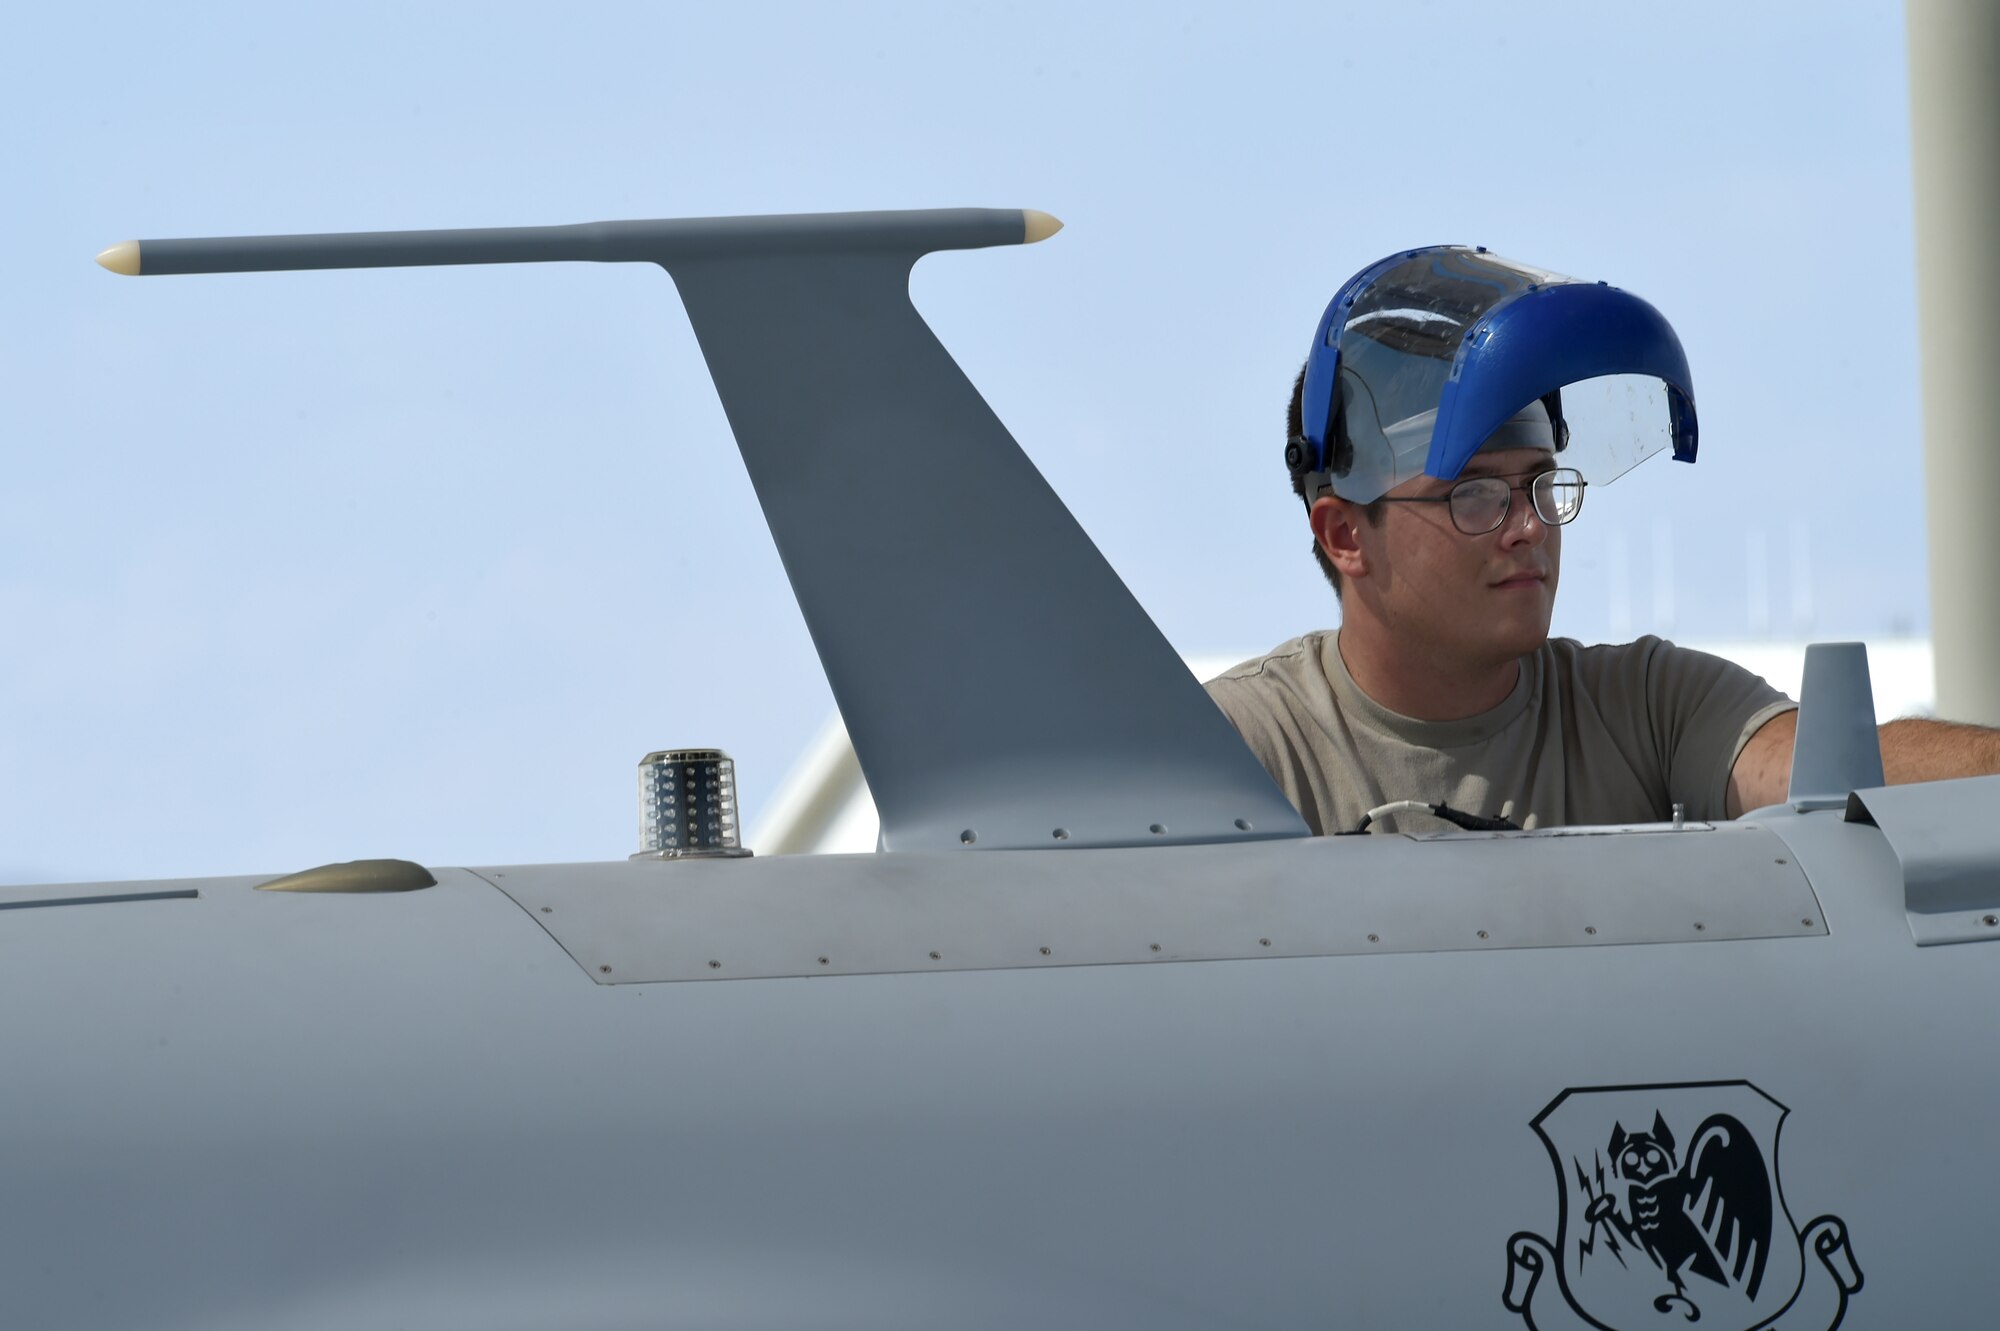 An MQ-1 Predator maintainer assigned to the 432nd Aircraft Maintenance Squadron, Tiger Aircraft Maintenance Unit inspects an MQ-1 Aug. 24, 2016, at Creech Air Force Base, Nevada. Maintainers from Tiger AMU have sustained the MQ-1 airframe at Creech since the early 2000’s, when it was first weaponized to provide armed reconnaissance. (U.S. Air force photo by Airman 1st Class James Thompson)